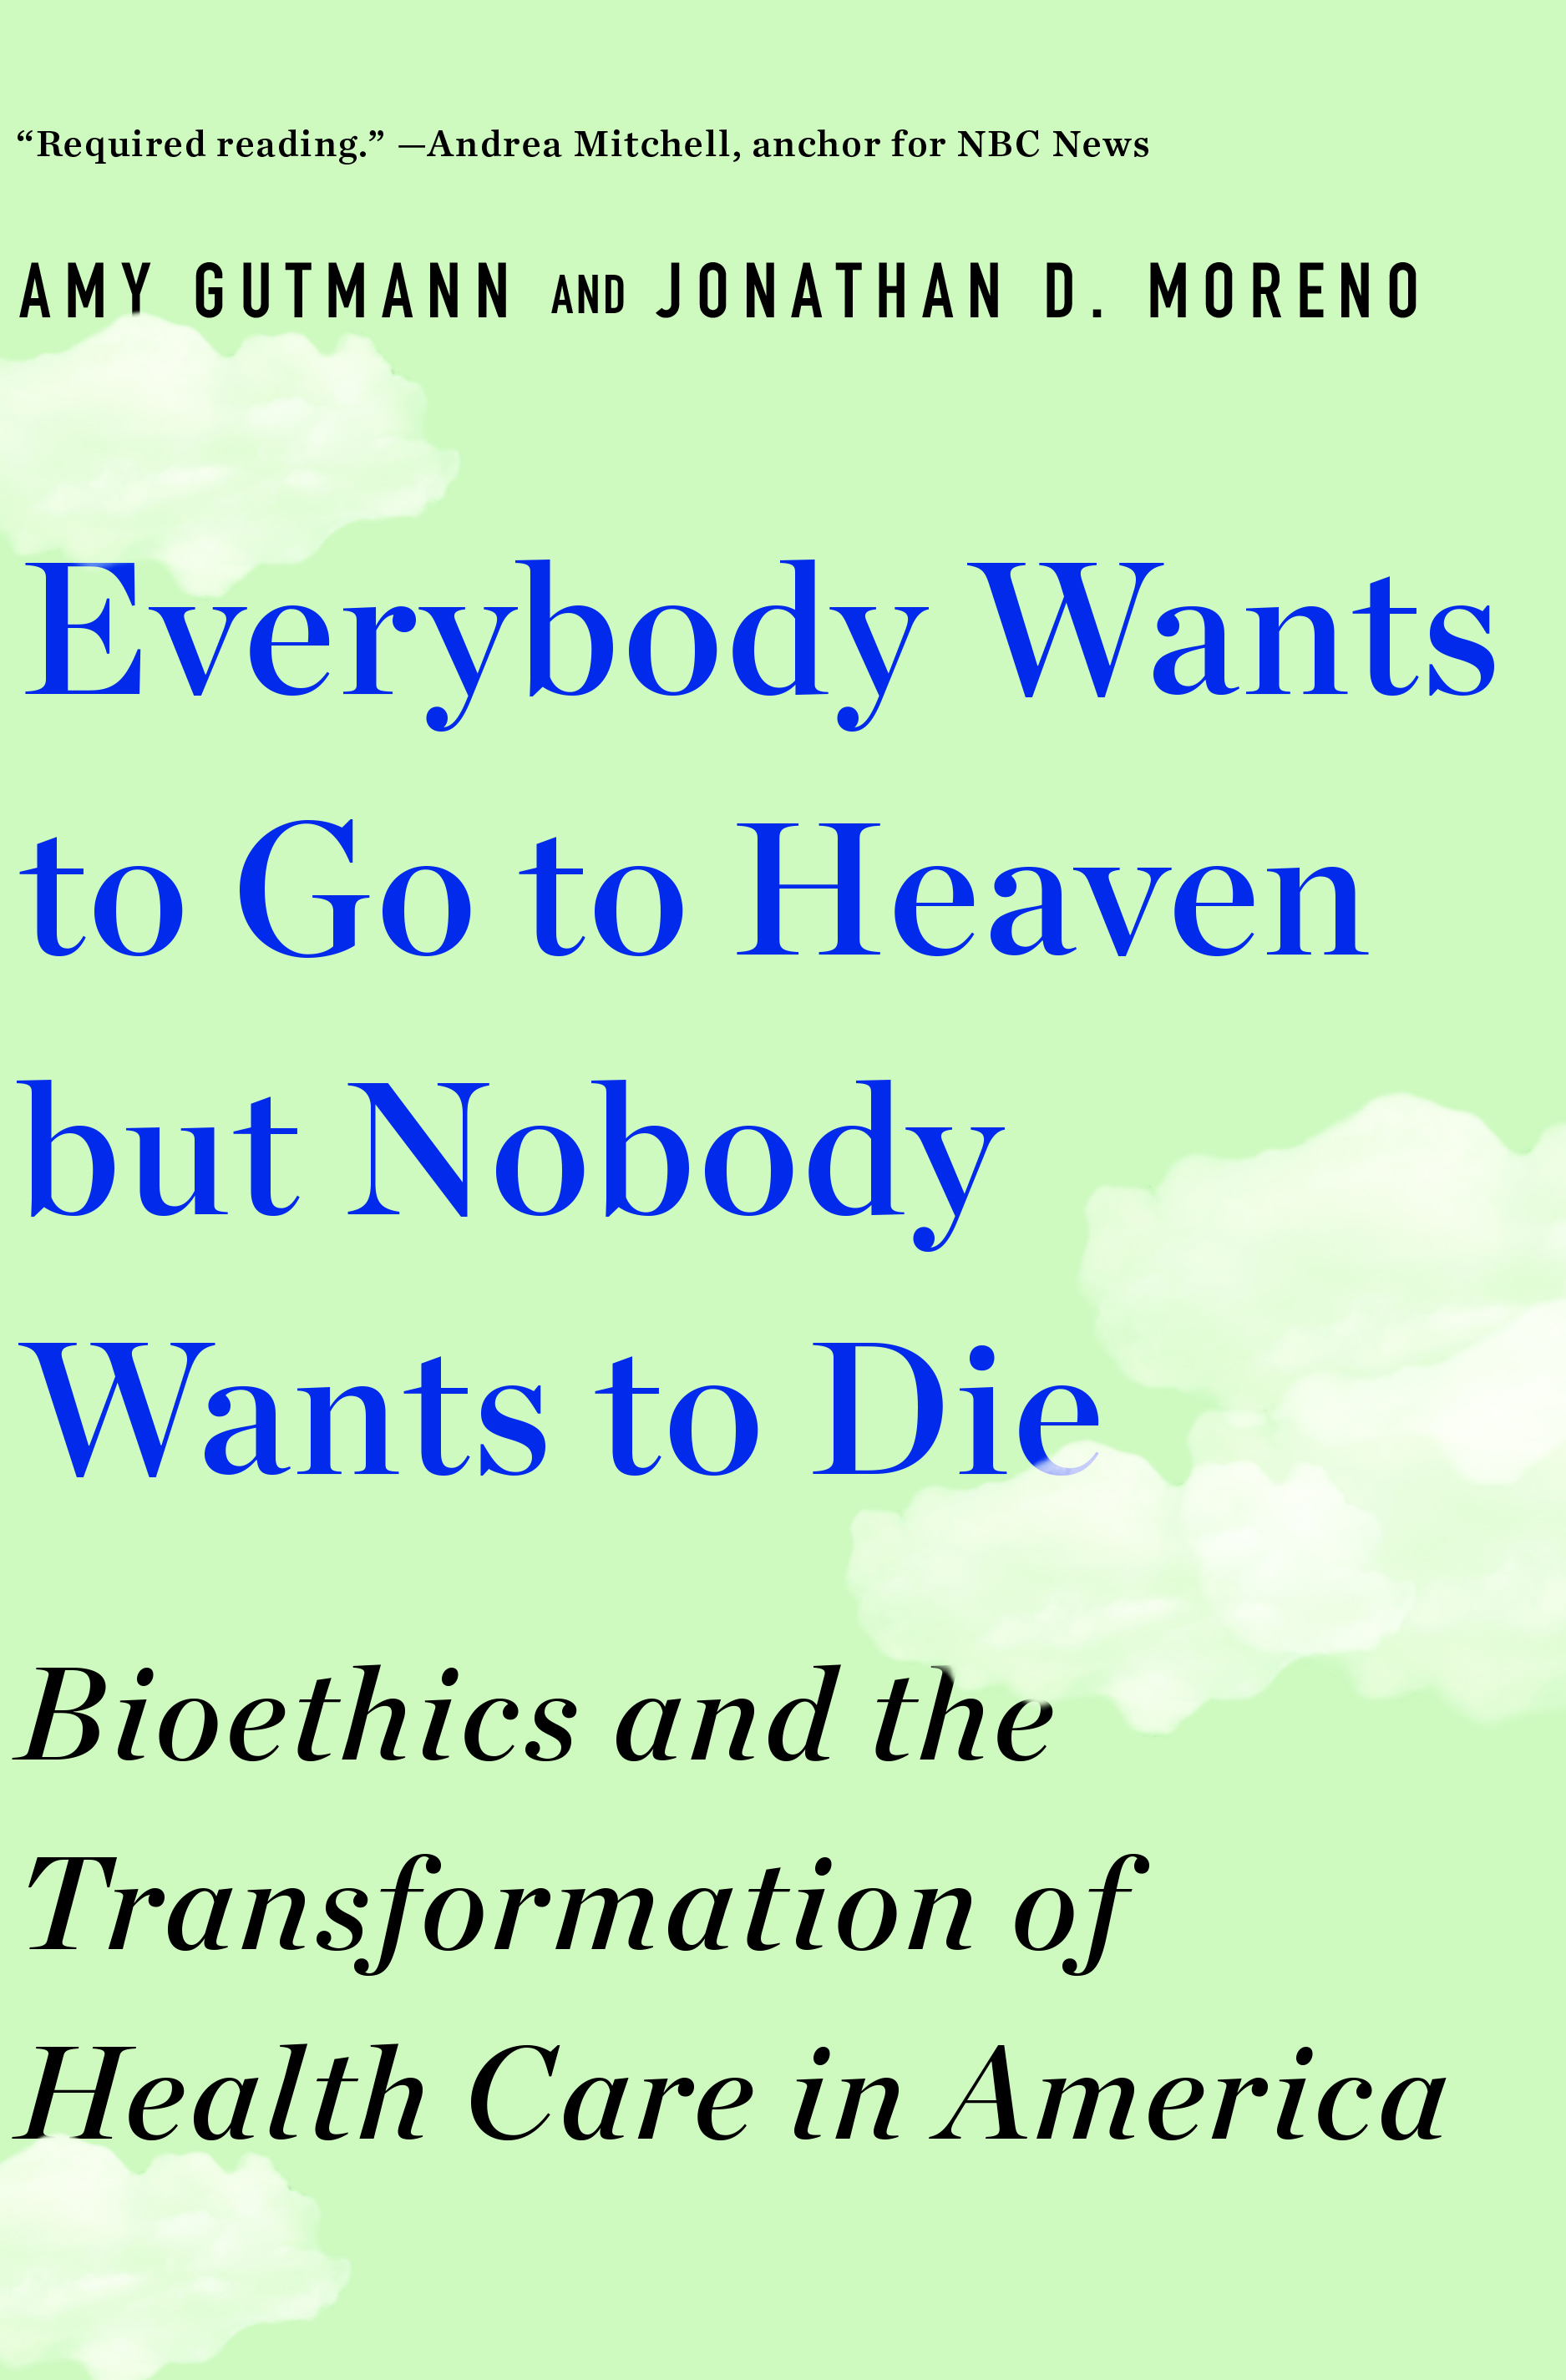 Paperback book cover for Everybody Wants to go to Heaven but Nobody Wants to Die